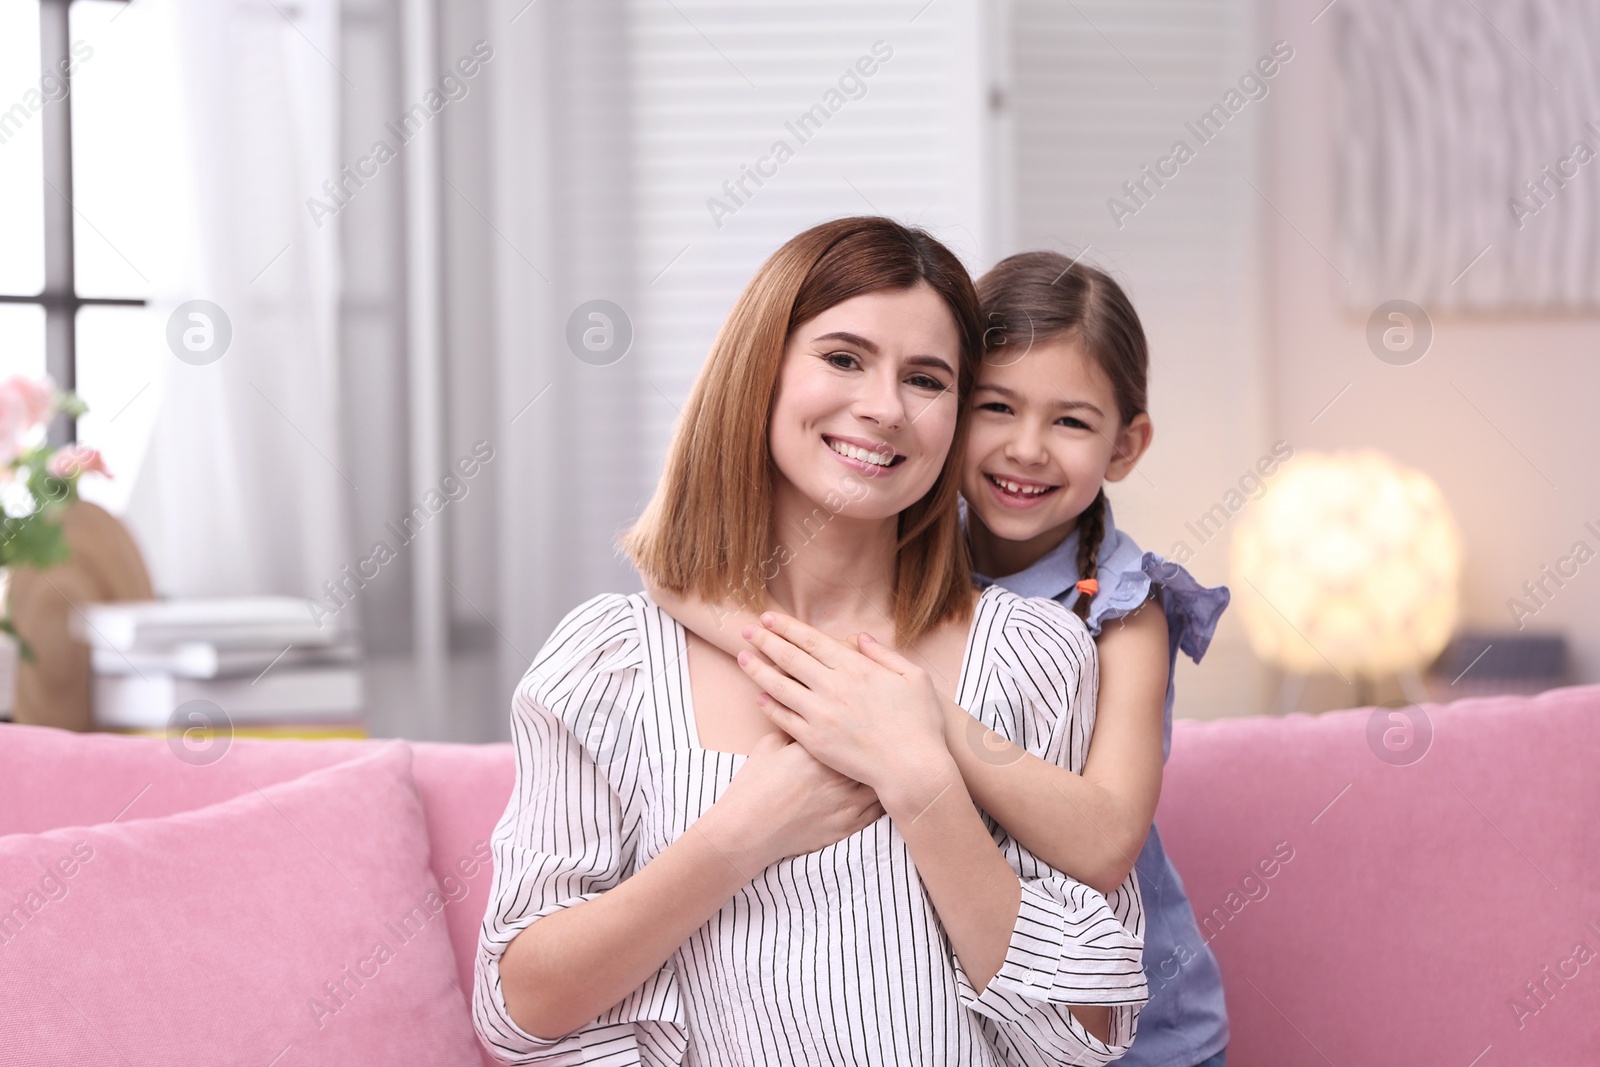 Photo of Happy woman and daughter together at home